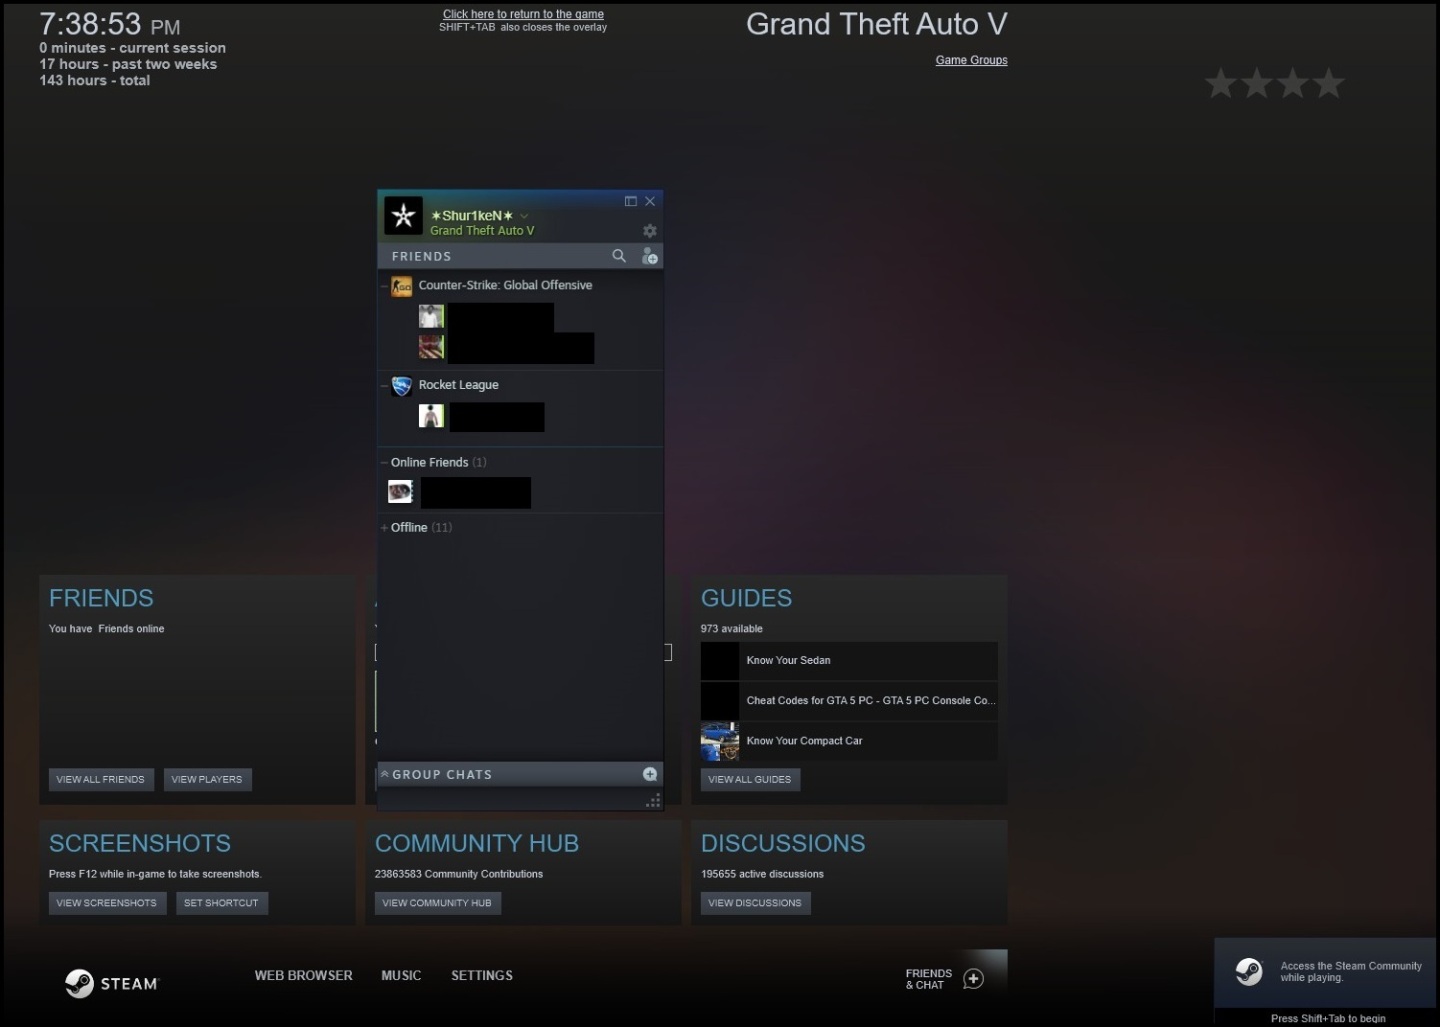 Steam Community :: Guide :: I Fixed the Challenges Interface